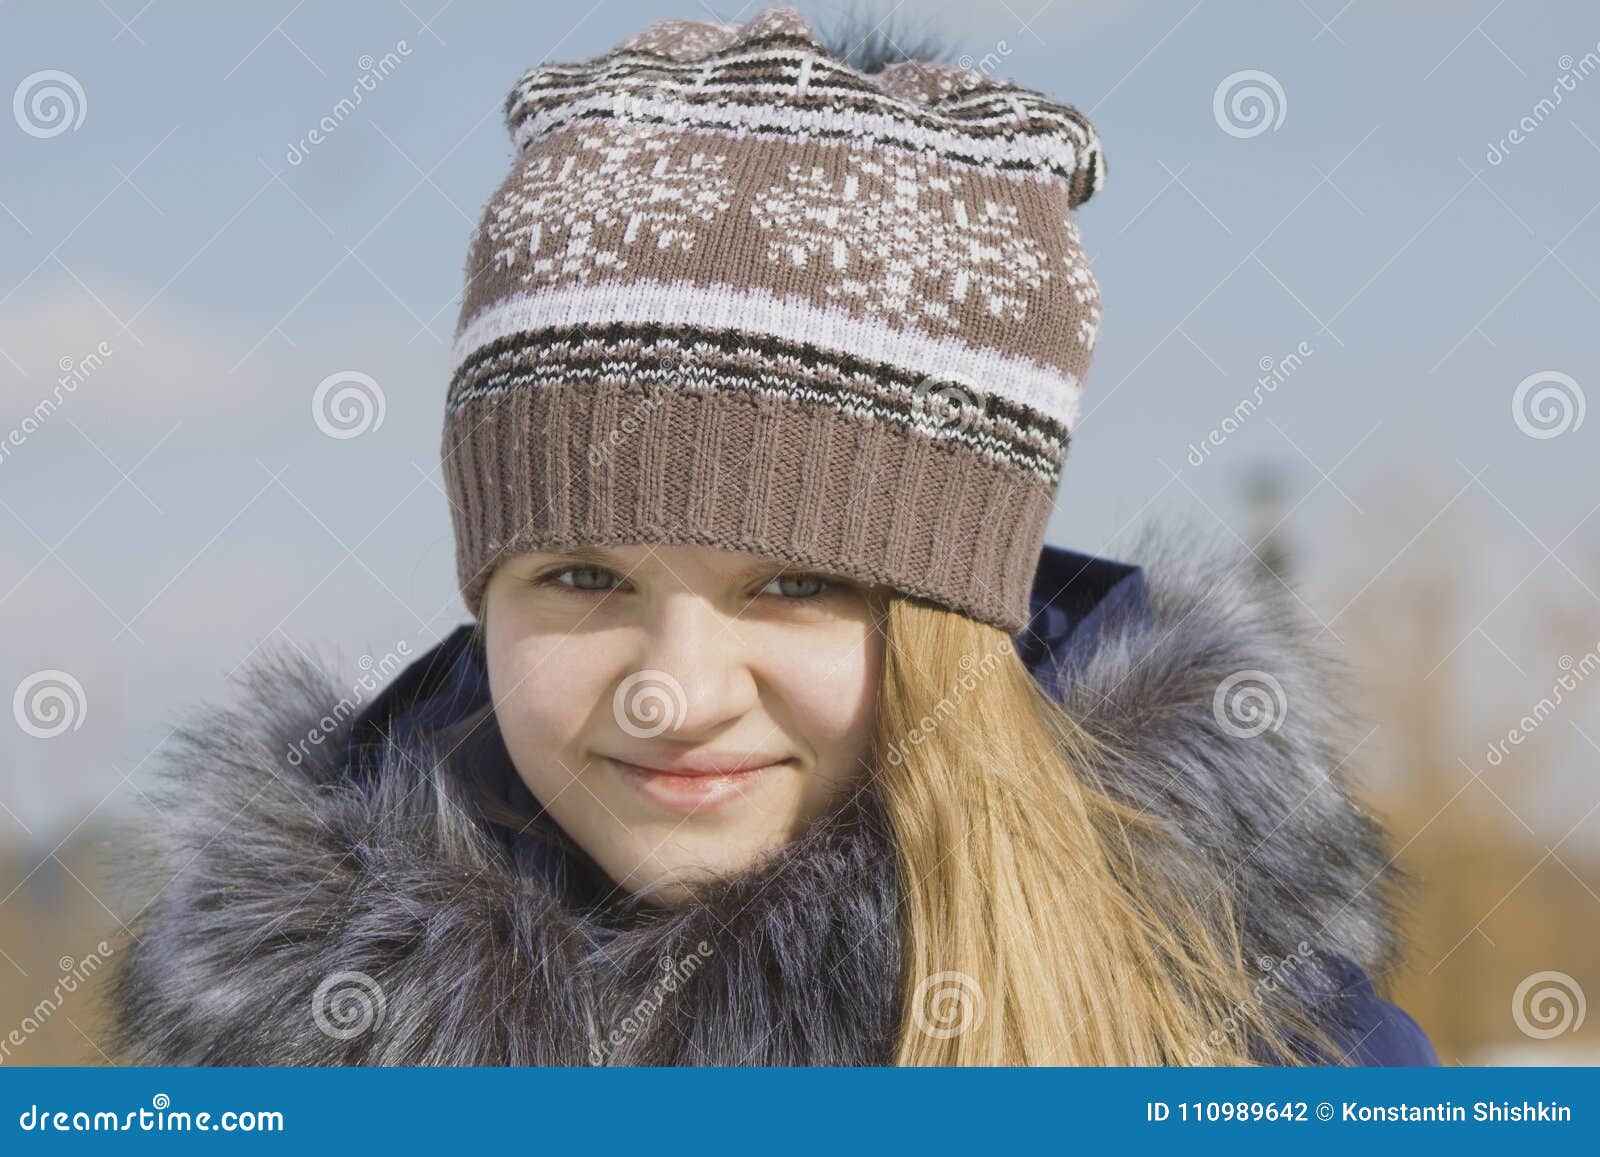 Portrait of Teen Girl in Cap and Jacket with Fur Collar in Winter ...